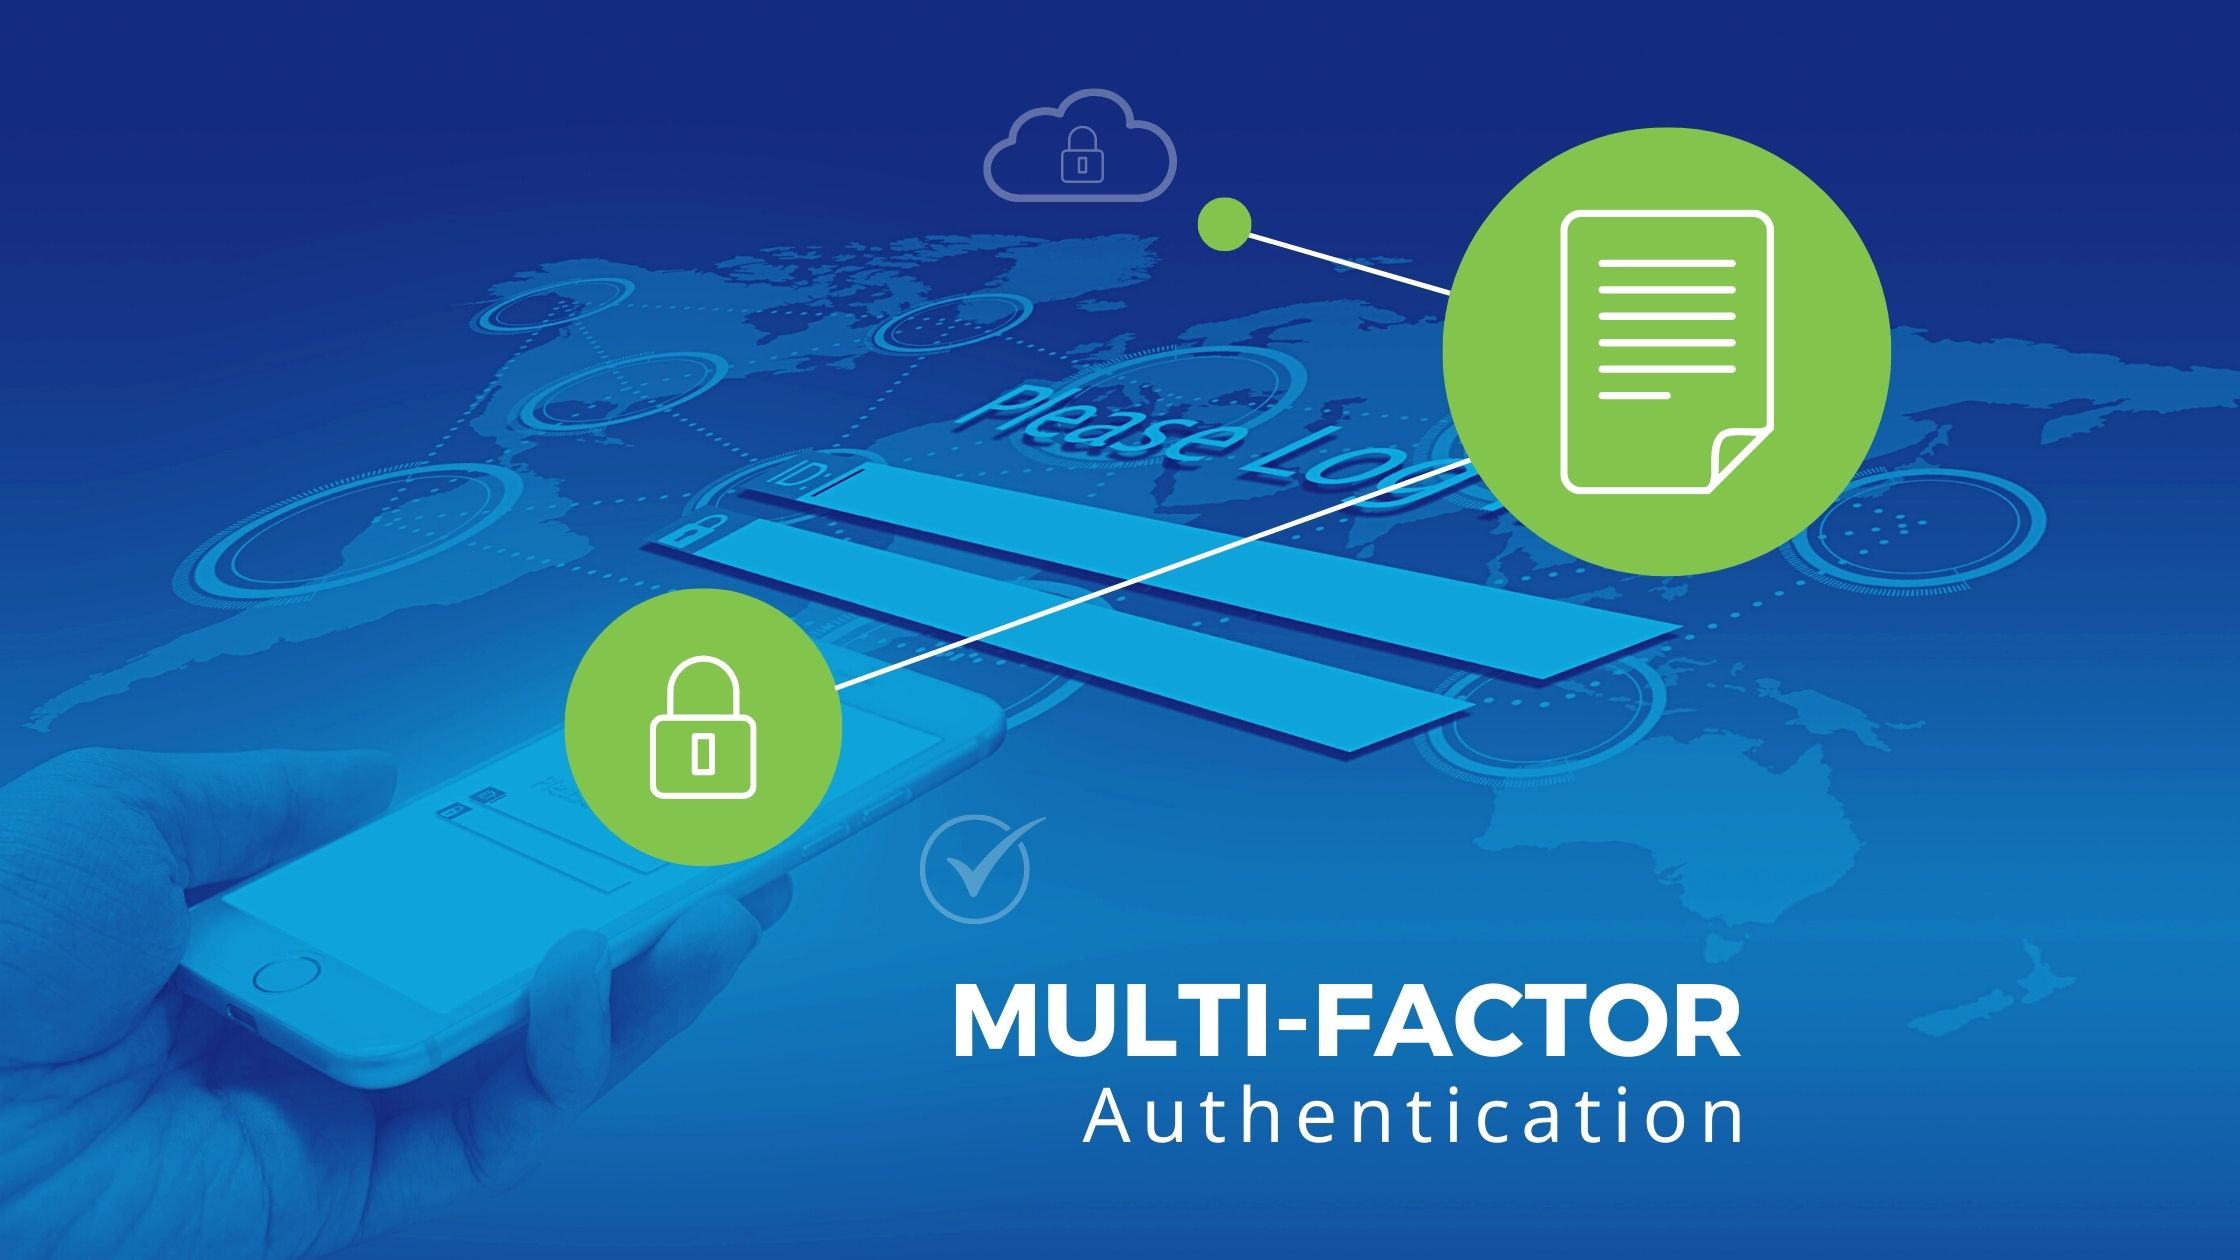 Gam Tech shares the top 6 reasons why multi-factor authentication is important for your business.